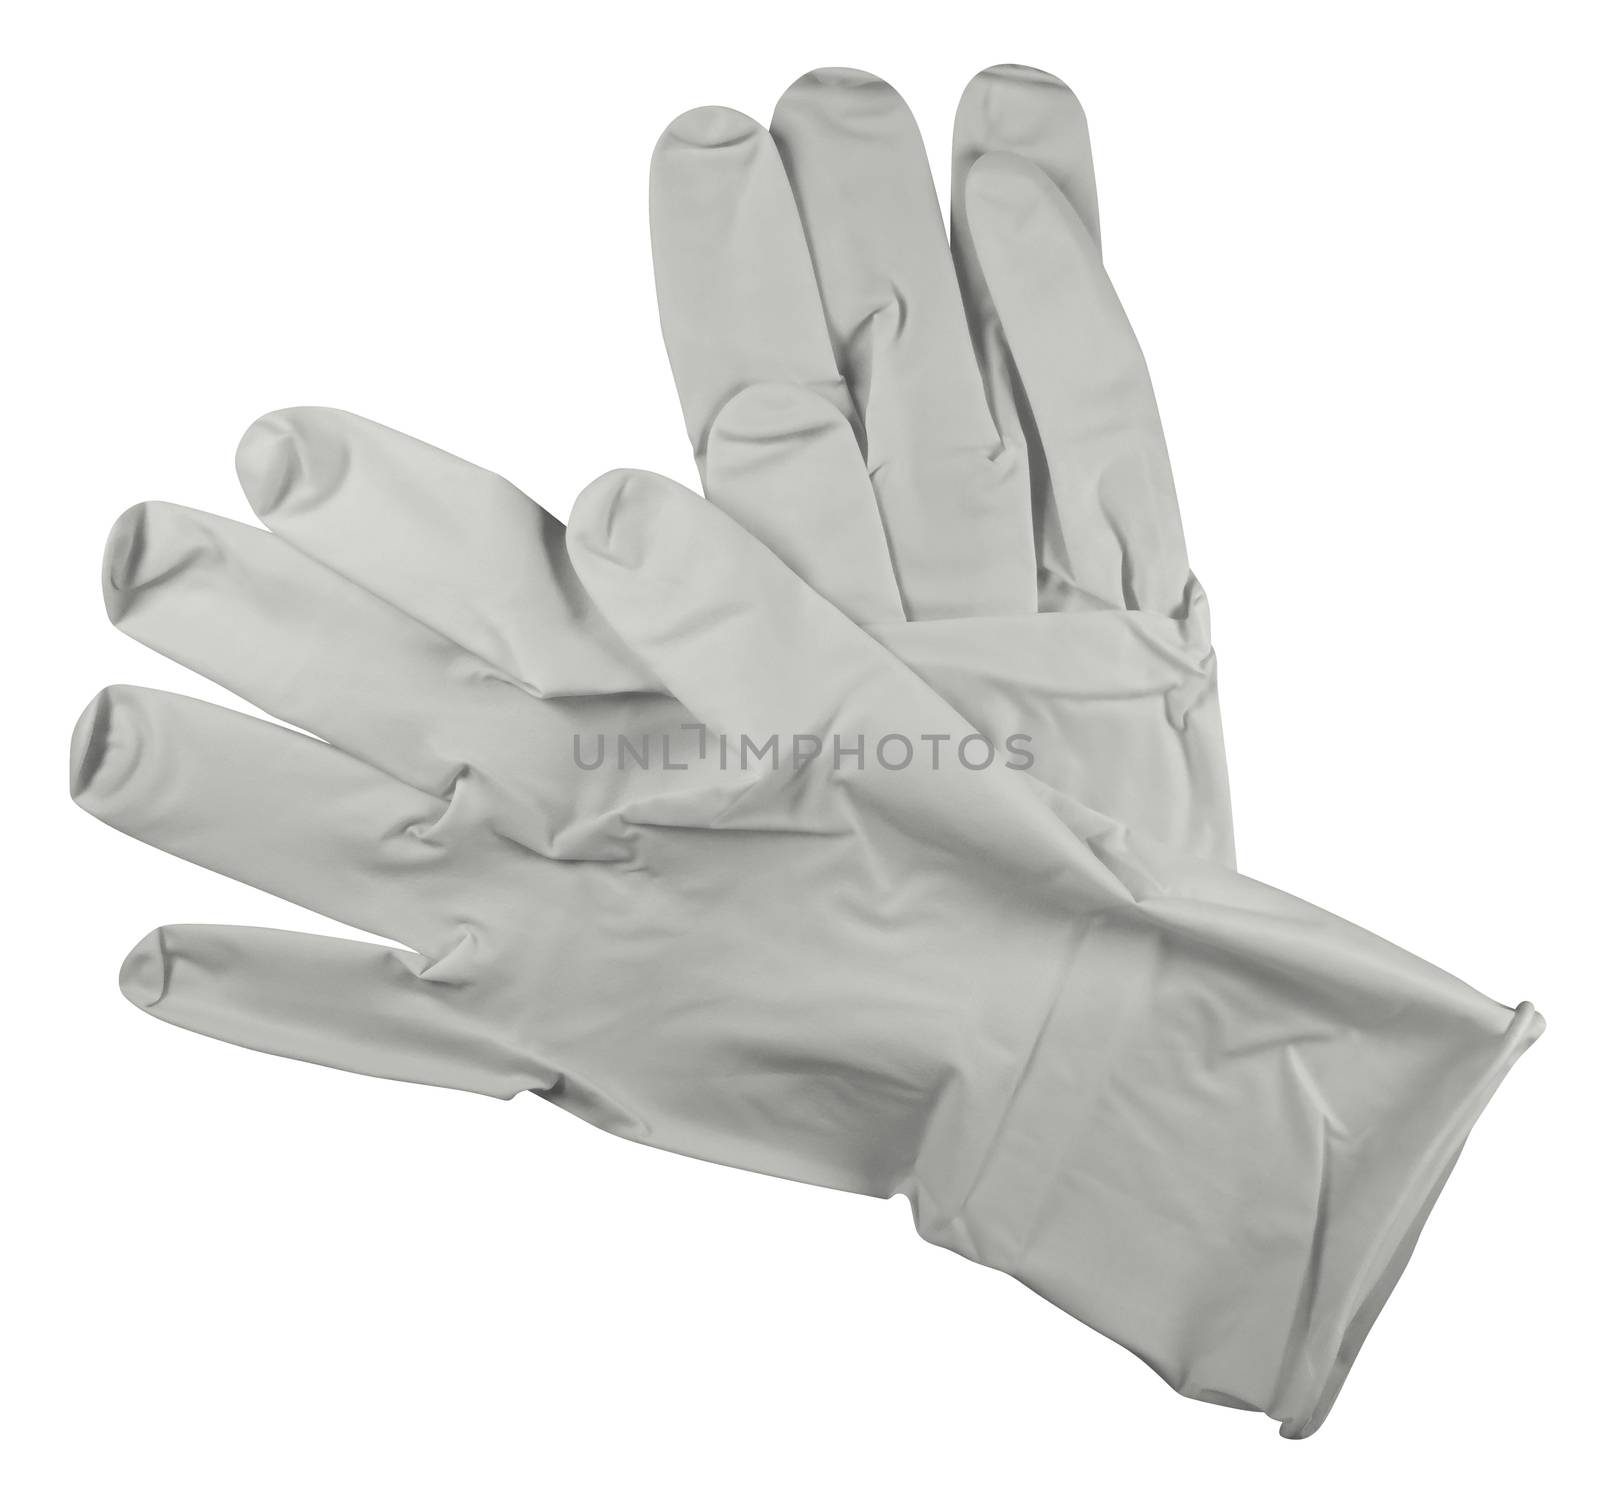 Pair of medical rubber gloves, isolated on white background. Clipping Path included.